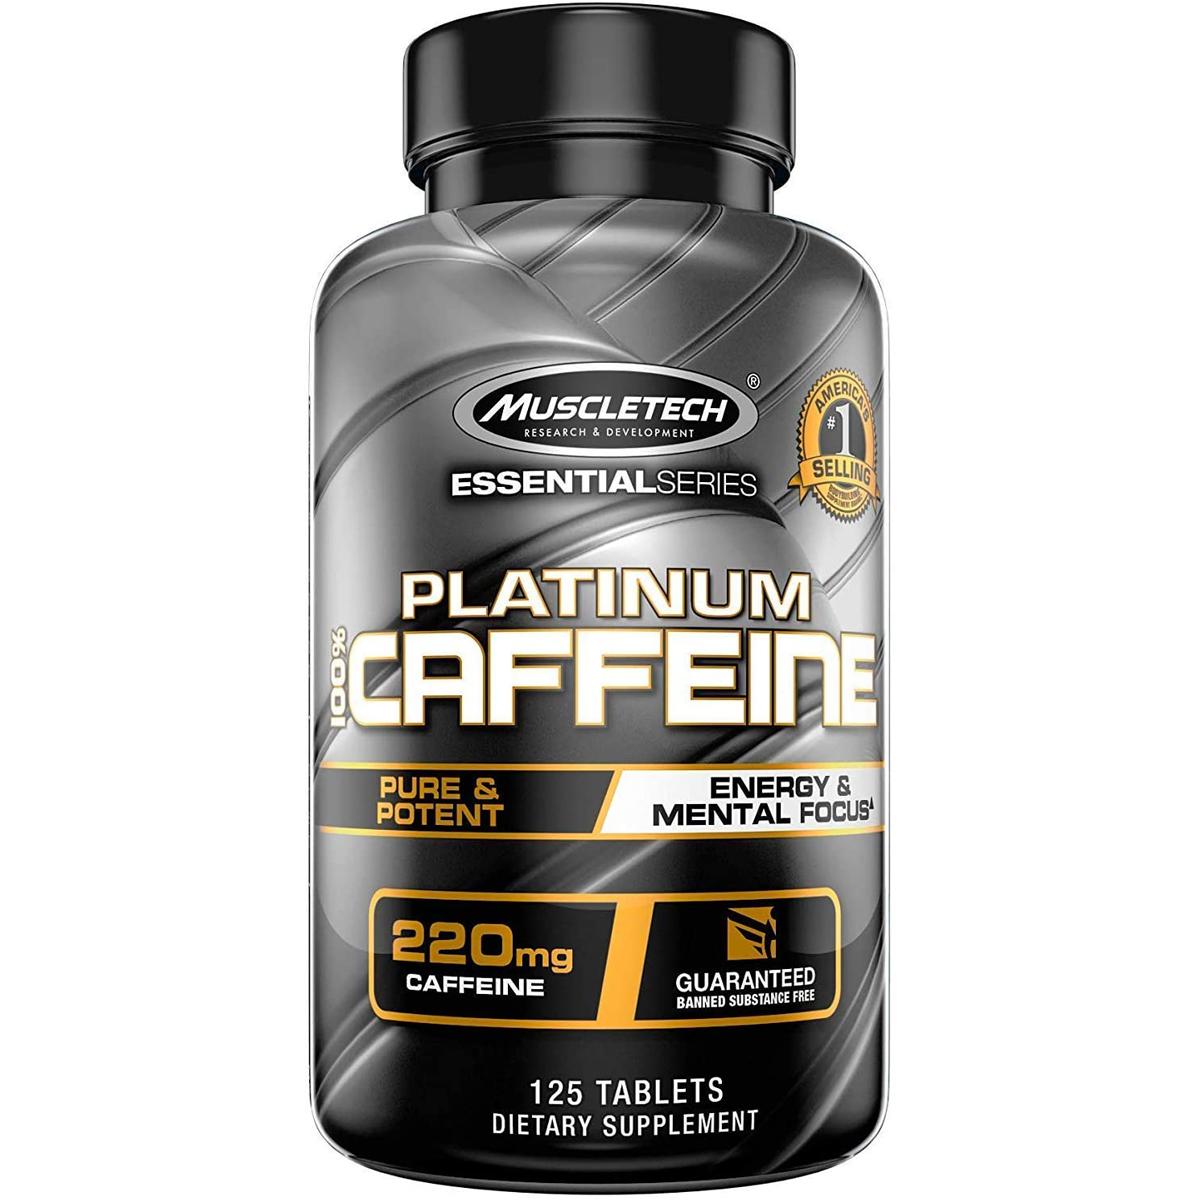 125 MuscleTech 220mg Caffeine Tablets for $2.93 Shipped